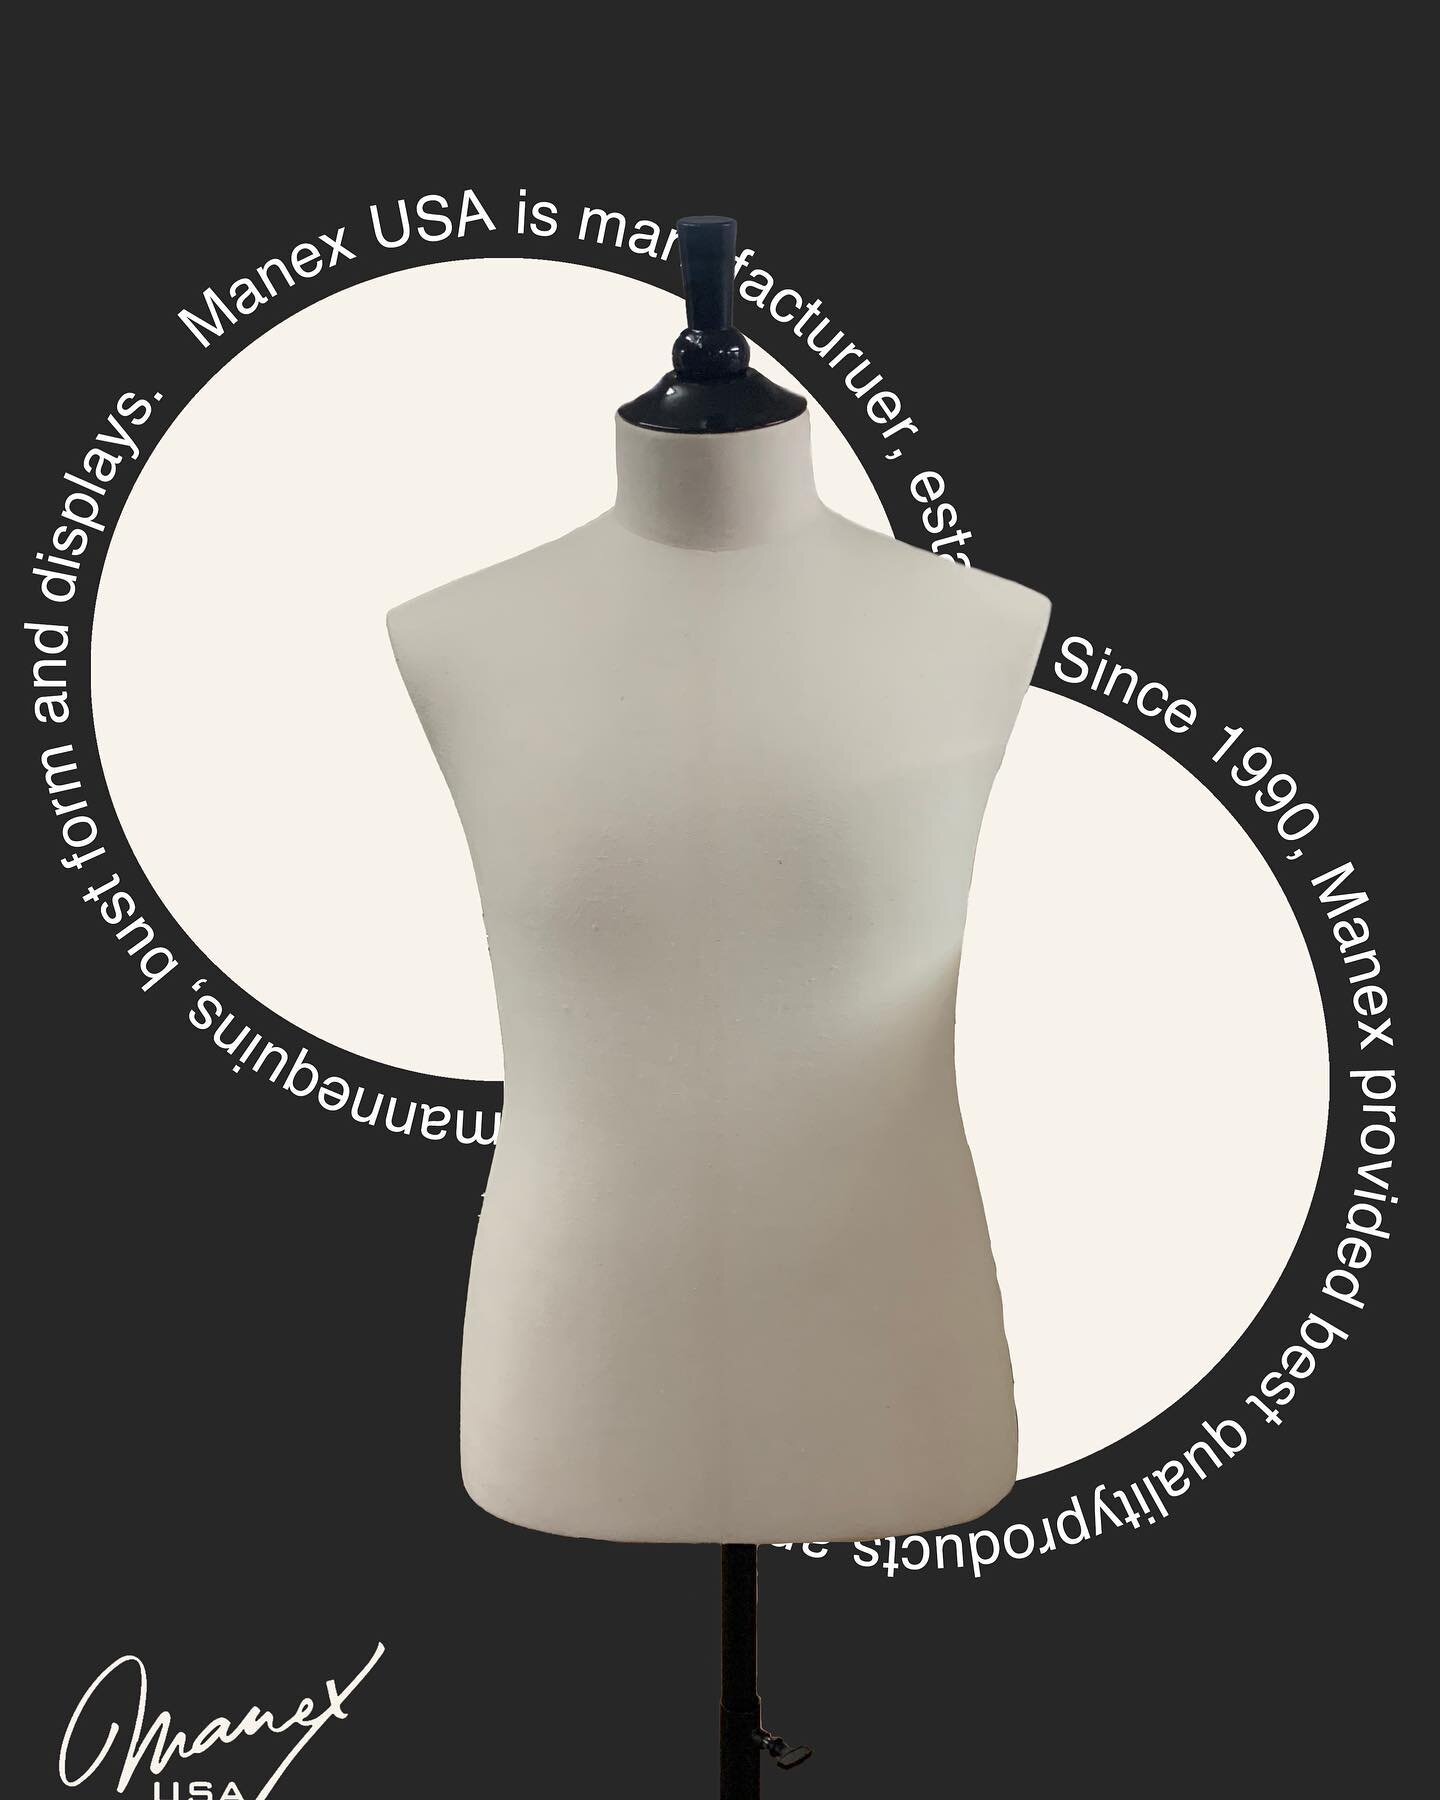 Dress forms for your best tailoring and desigining. Upgrade your fit and details with our torso form! 🪡🧵📏
.
.
.
#mannequin #dressform #sewing #draping #tailormade #tailored #fashiondesign #faahiondesigner #fashionschool #fitnyc #parsonsschoolofdes